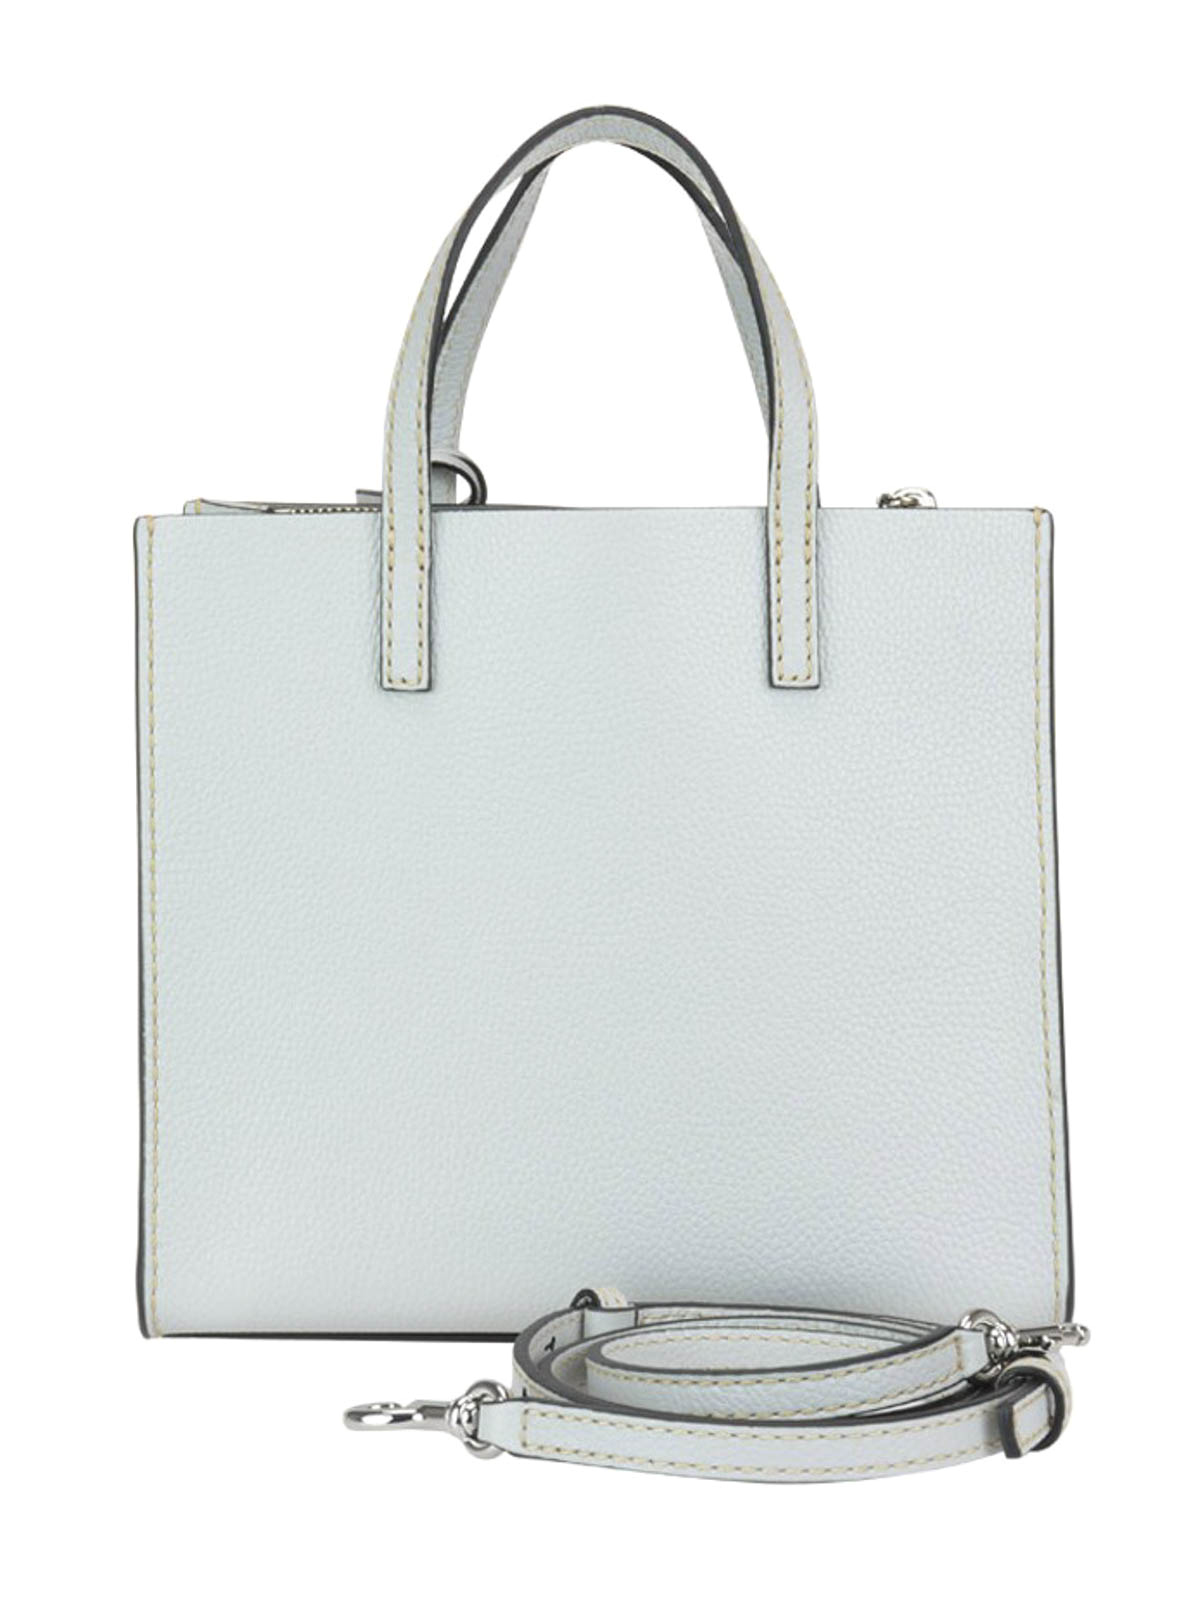 Totes bags Marc Jacobs - Grind Mini light grey leather tote bag ...